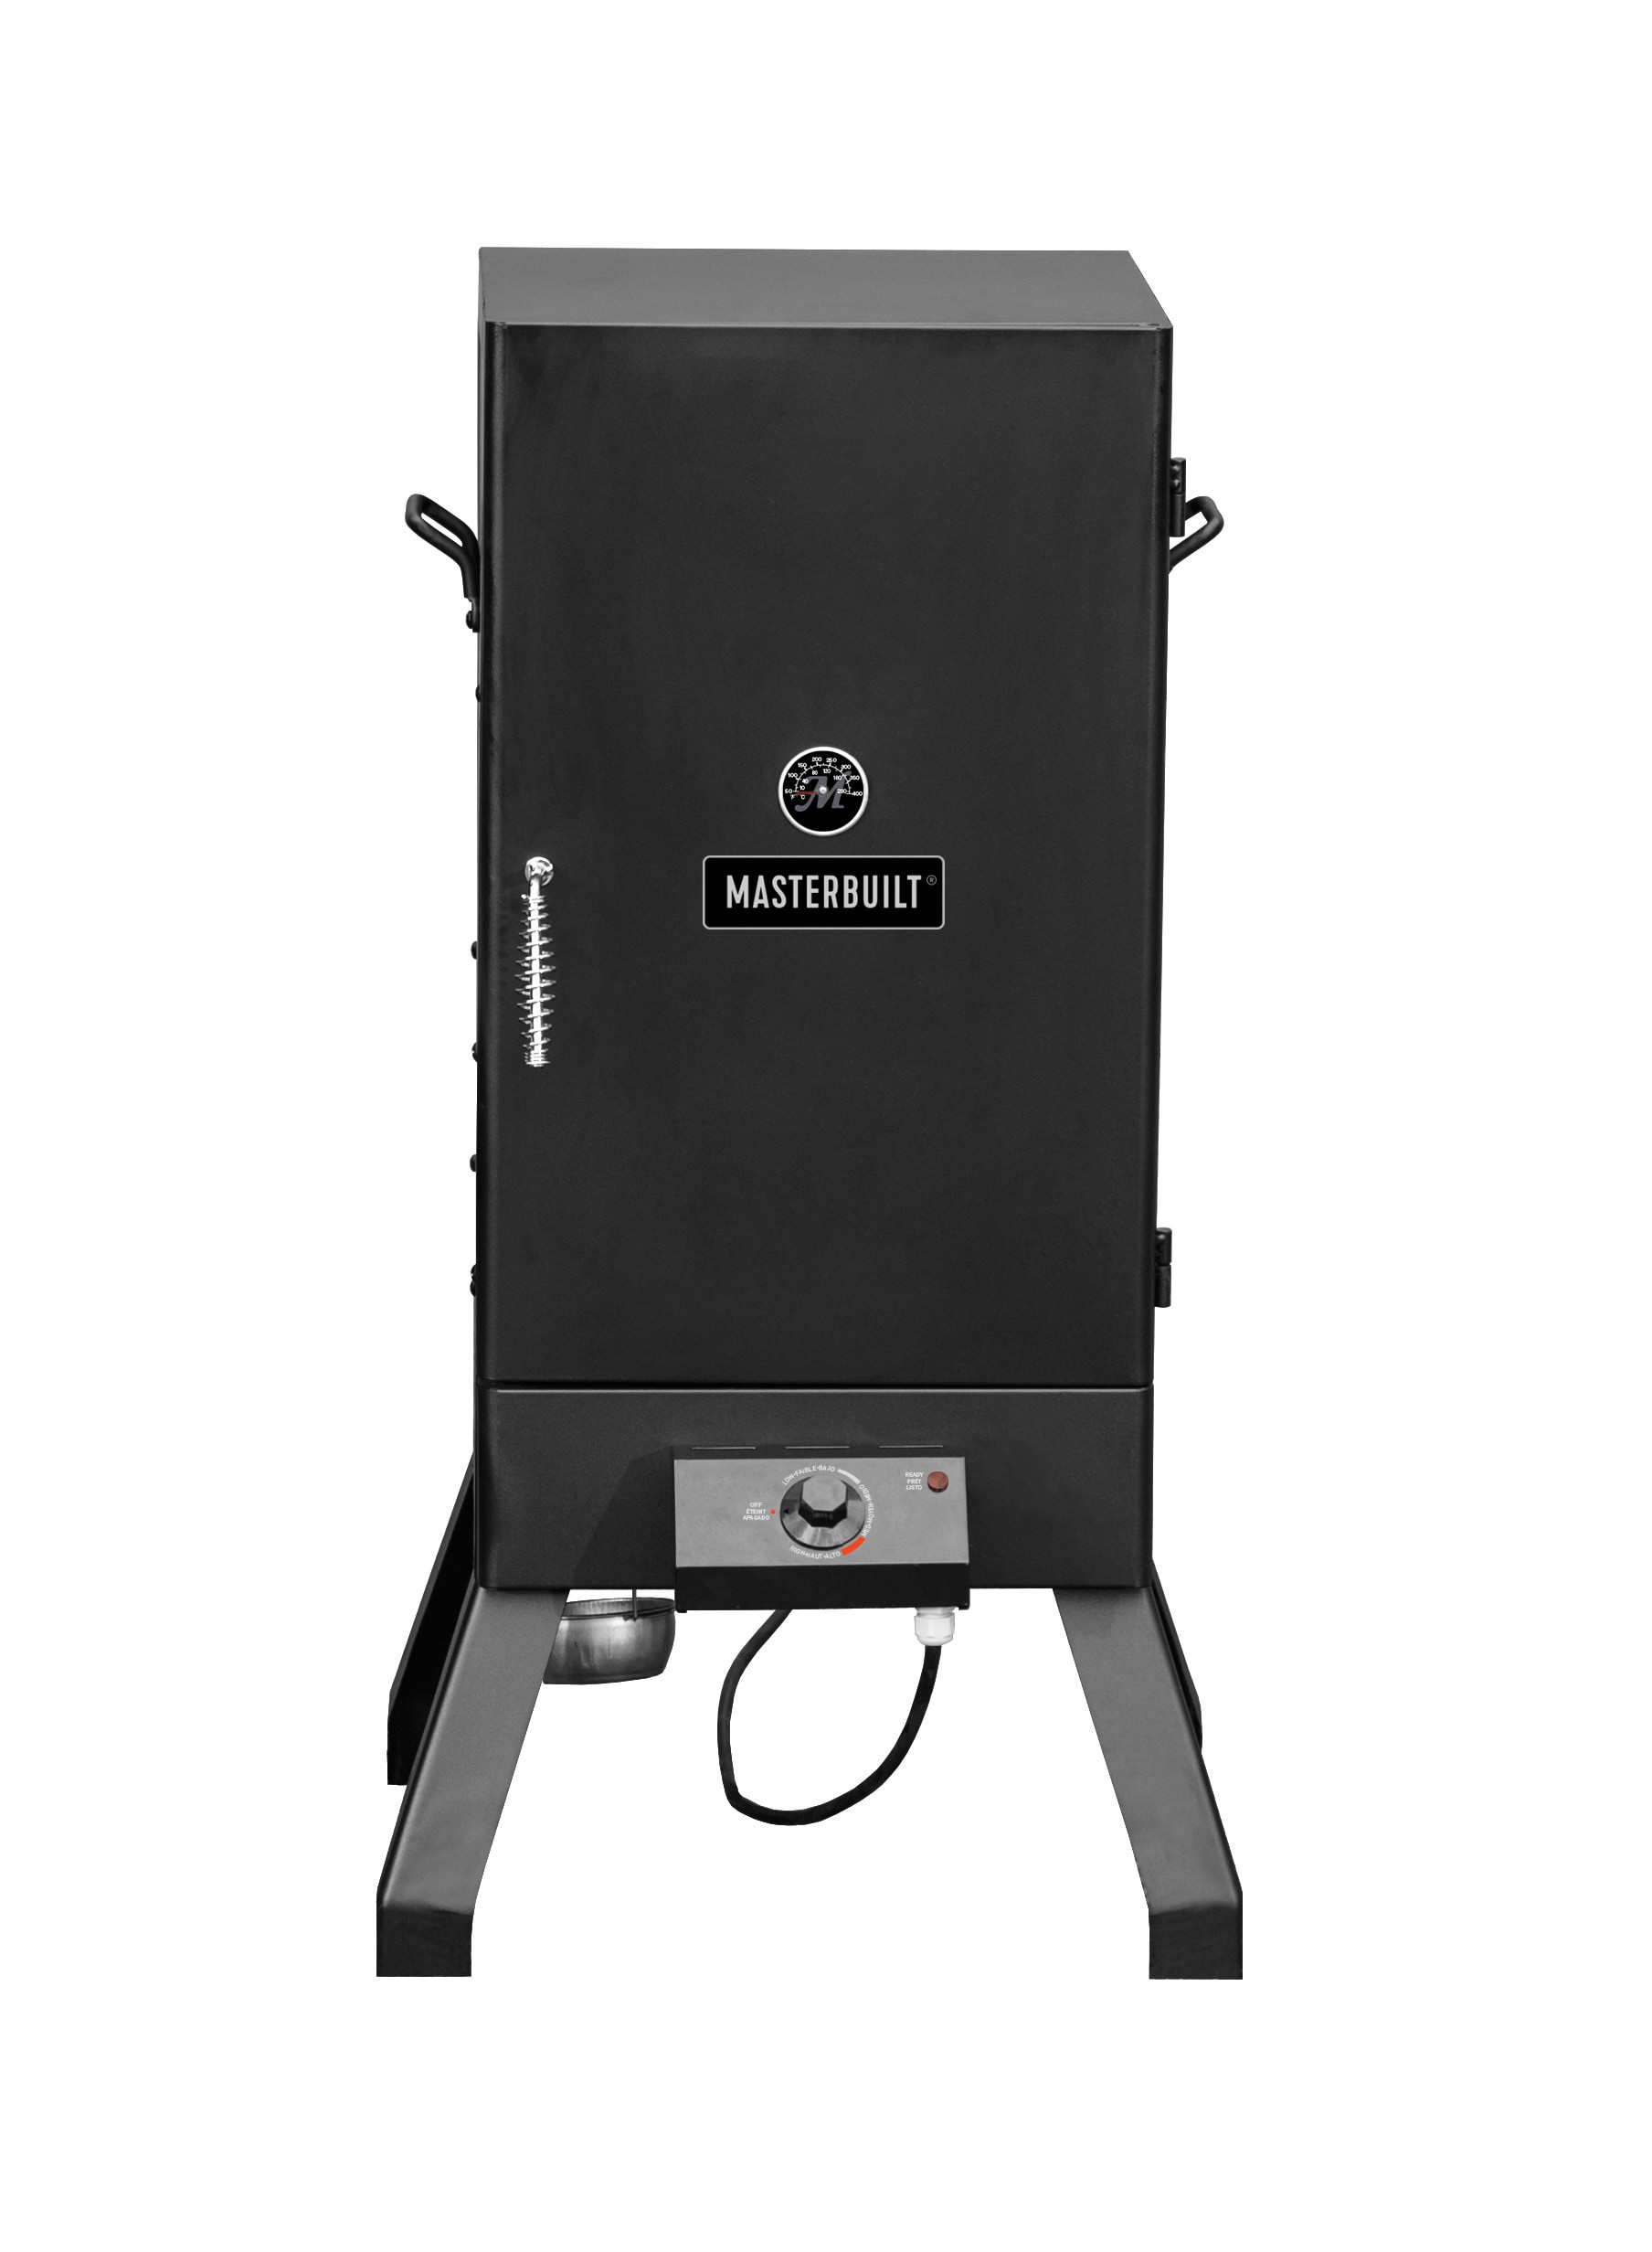 Masterbuilt Outdoor Barbecue 30 Digital Electric BBQ Meat Smoker Grill,  Black 